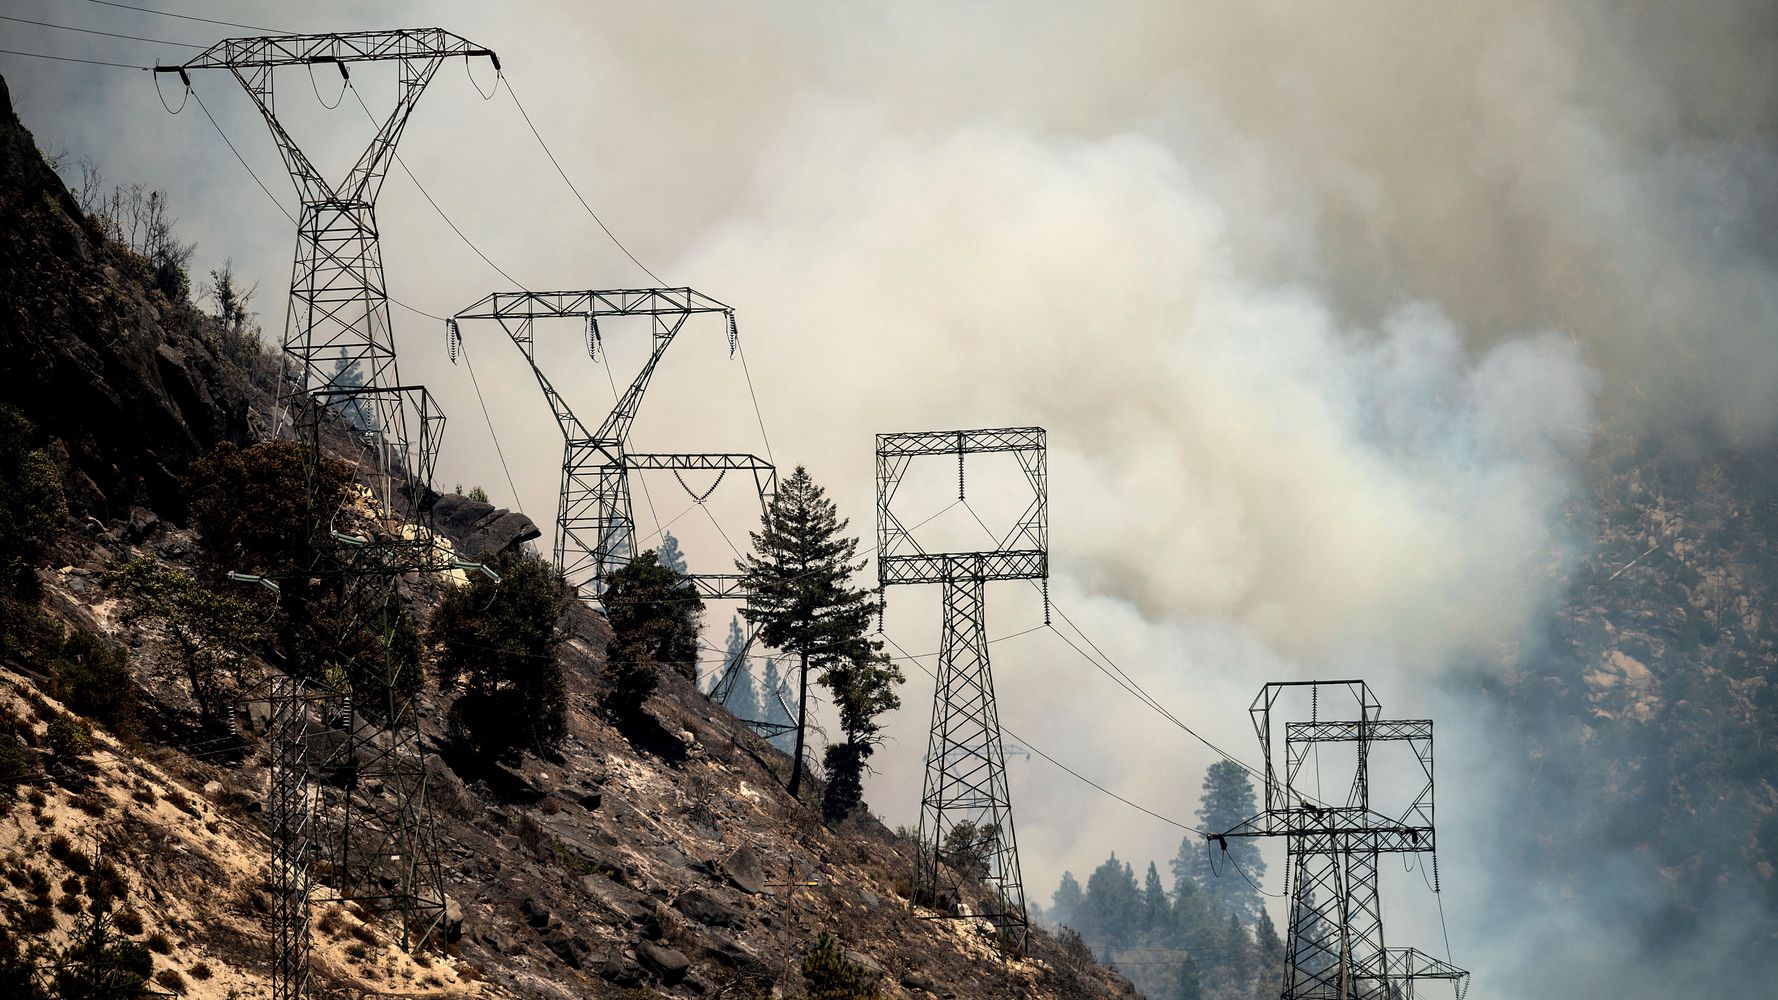 California Utility Company Says Its Equipment May Have Caused Fire